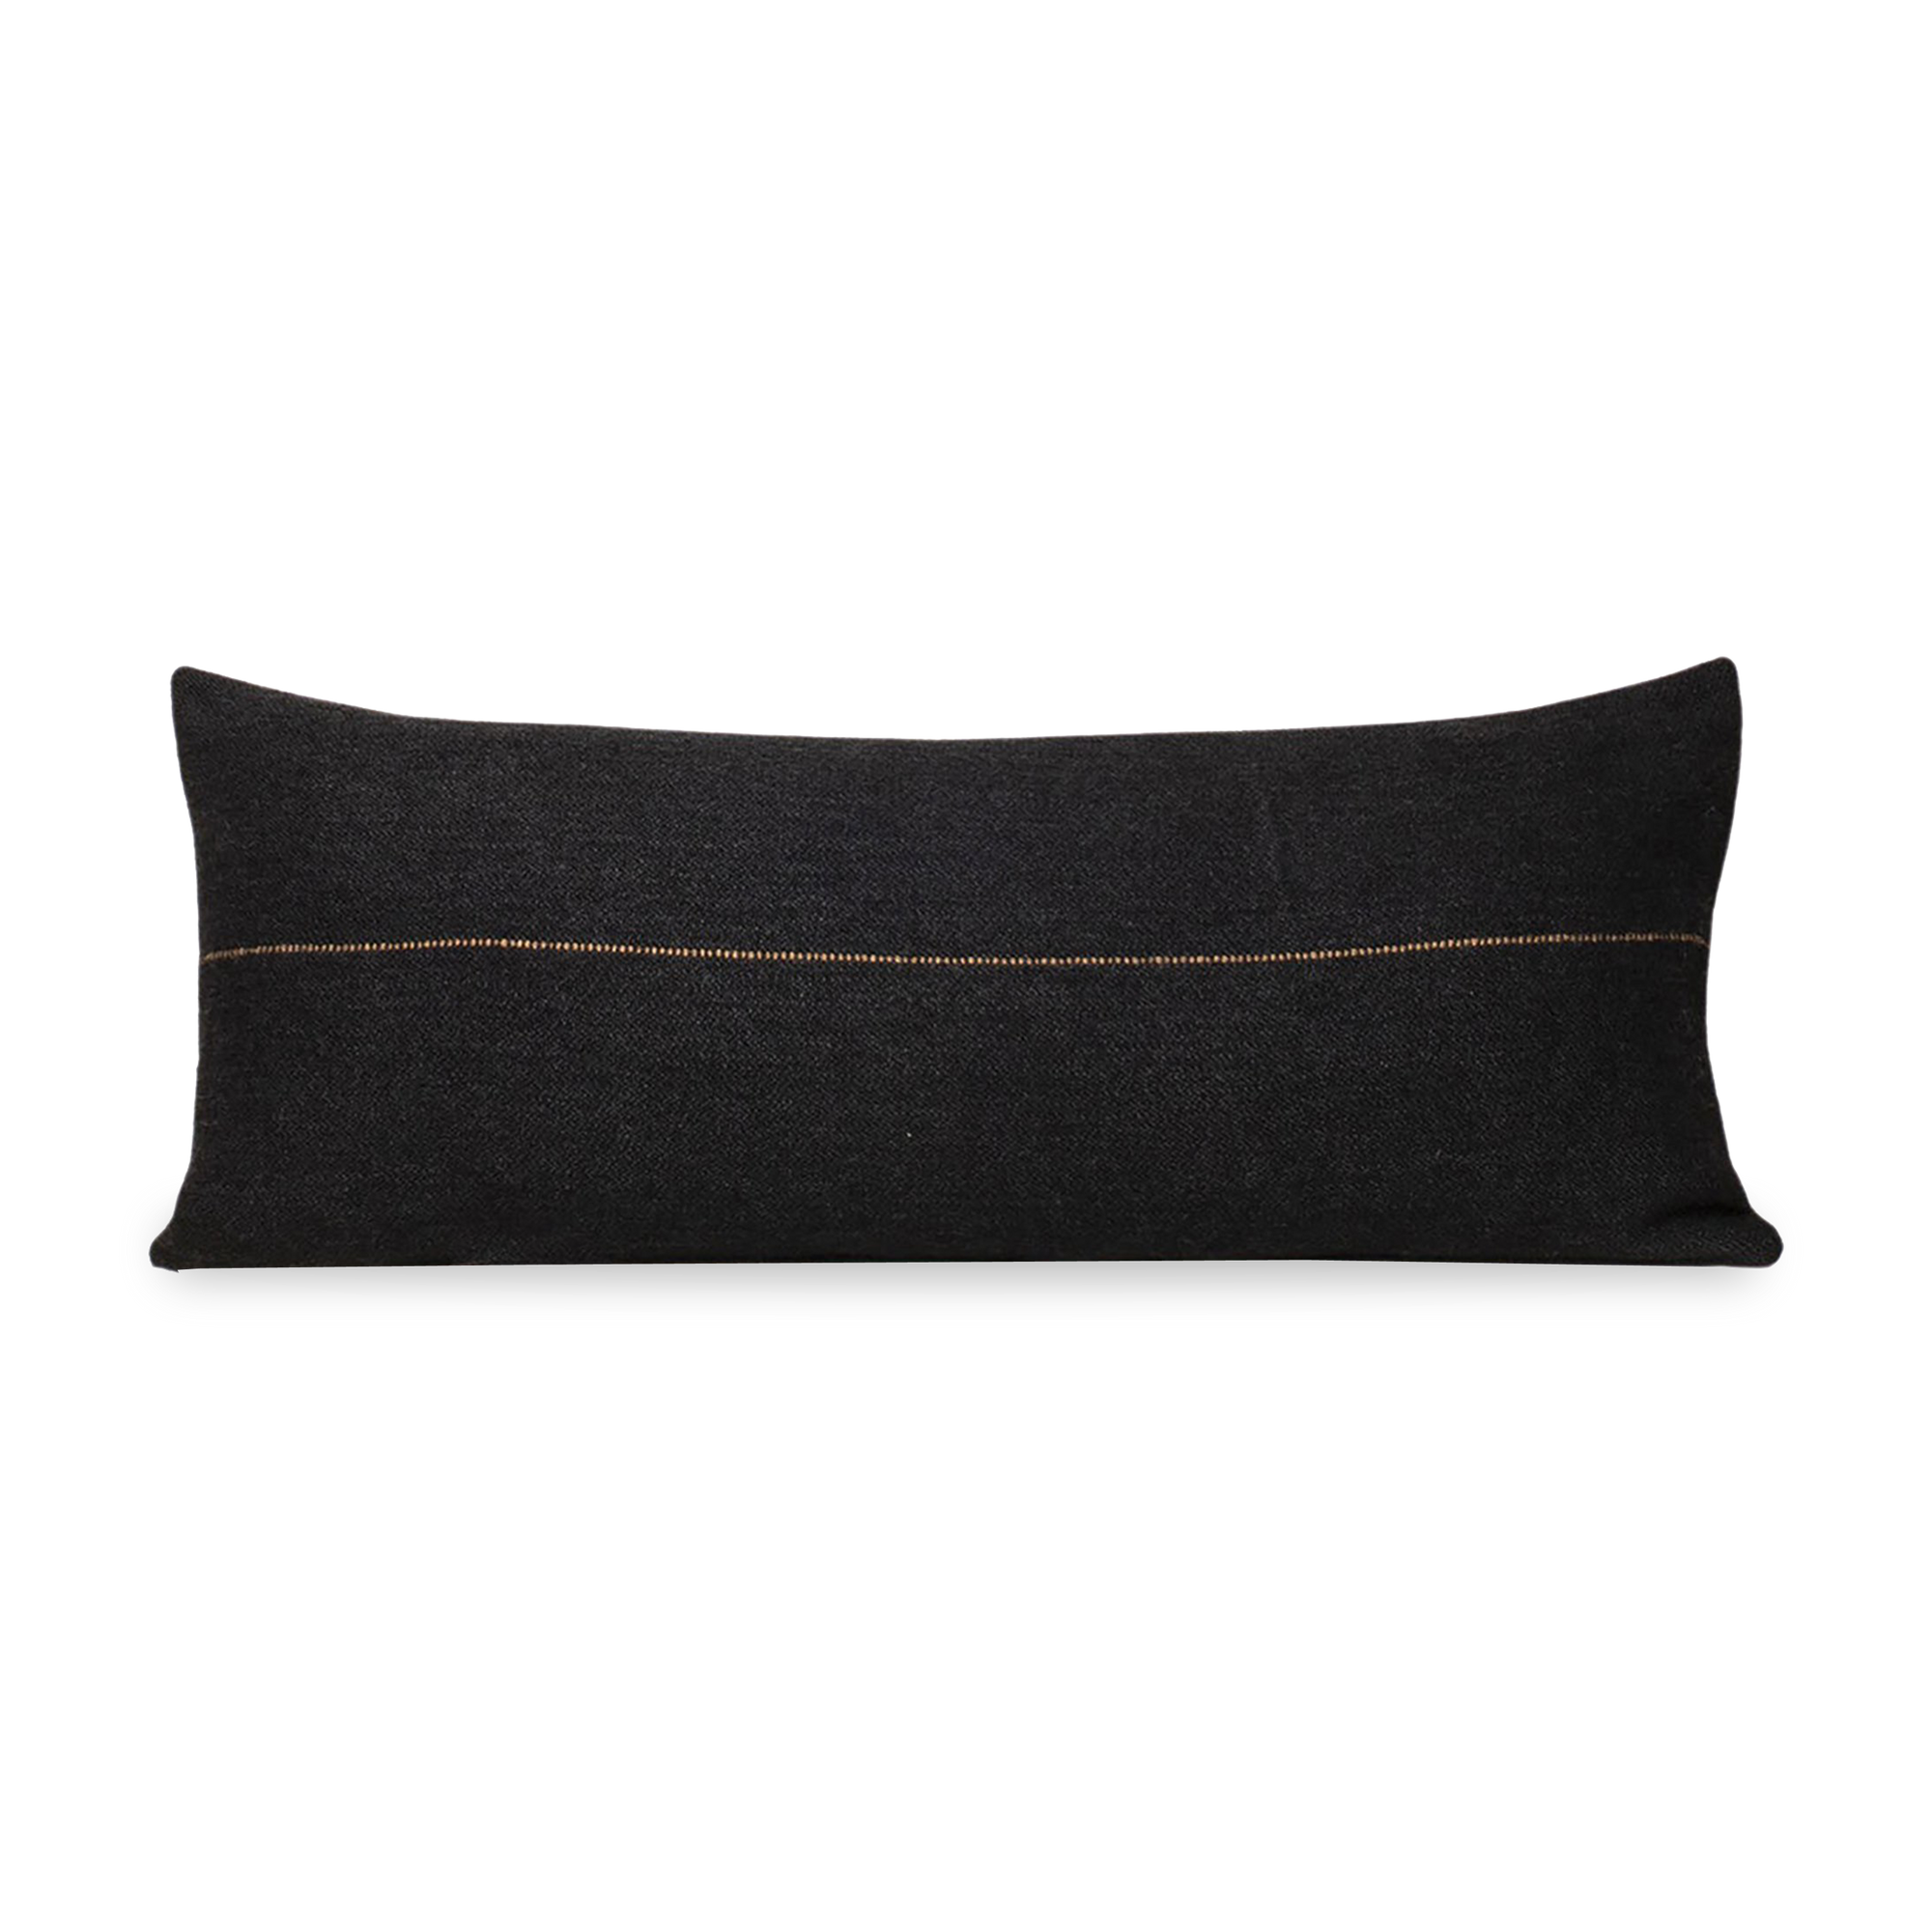 Taking cues from hand-woven materials from Peru, the Peruvian Pillow is a true reflection of its inspirational source.